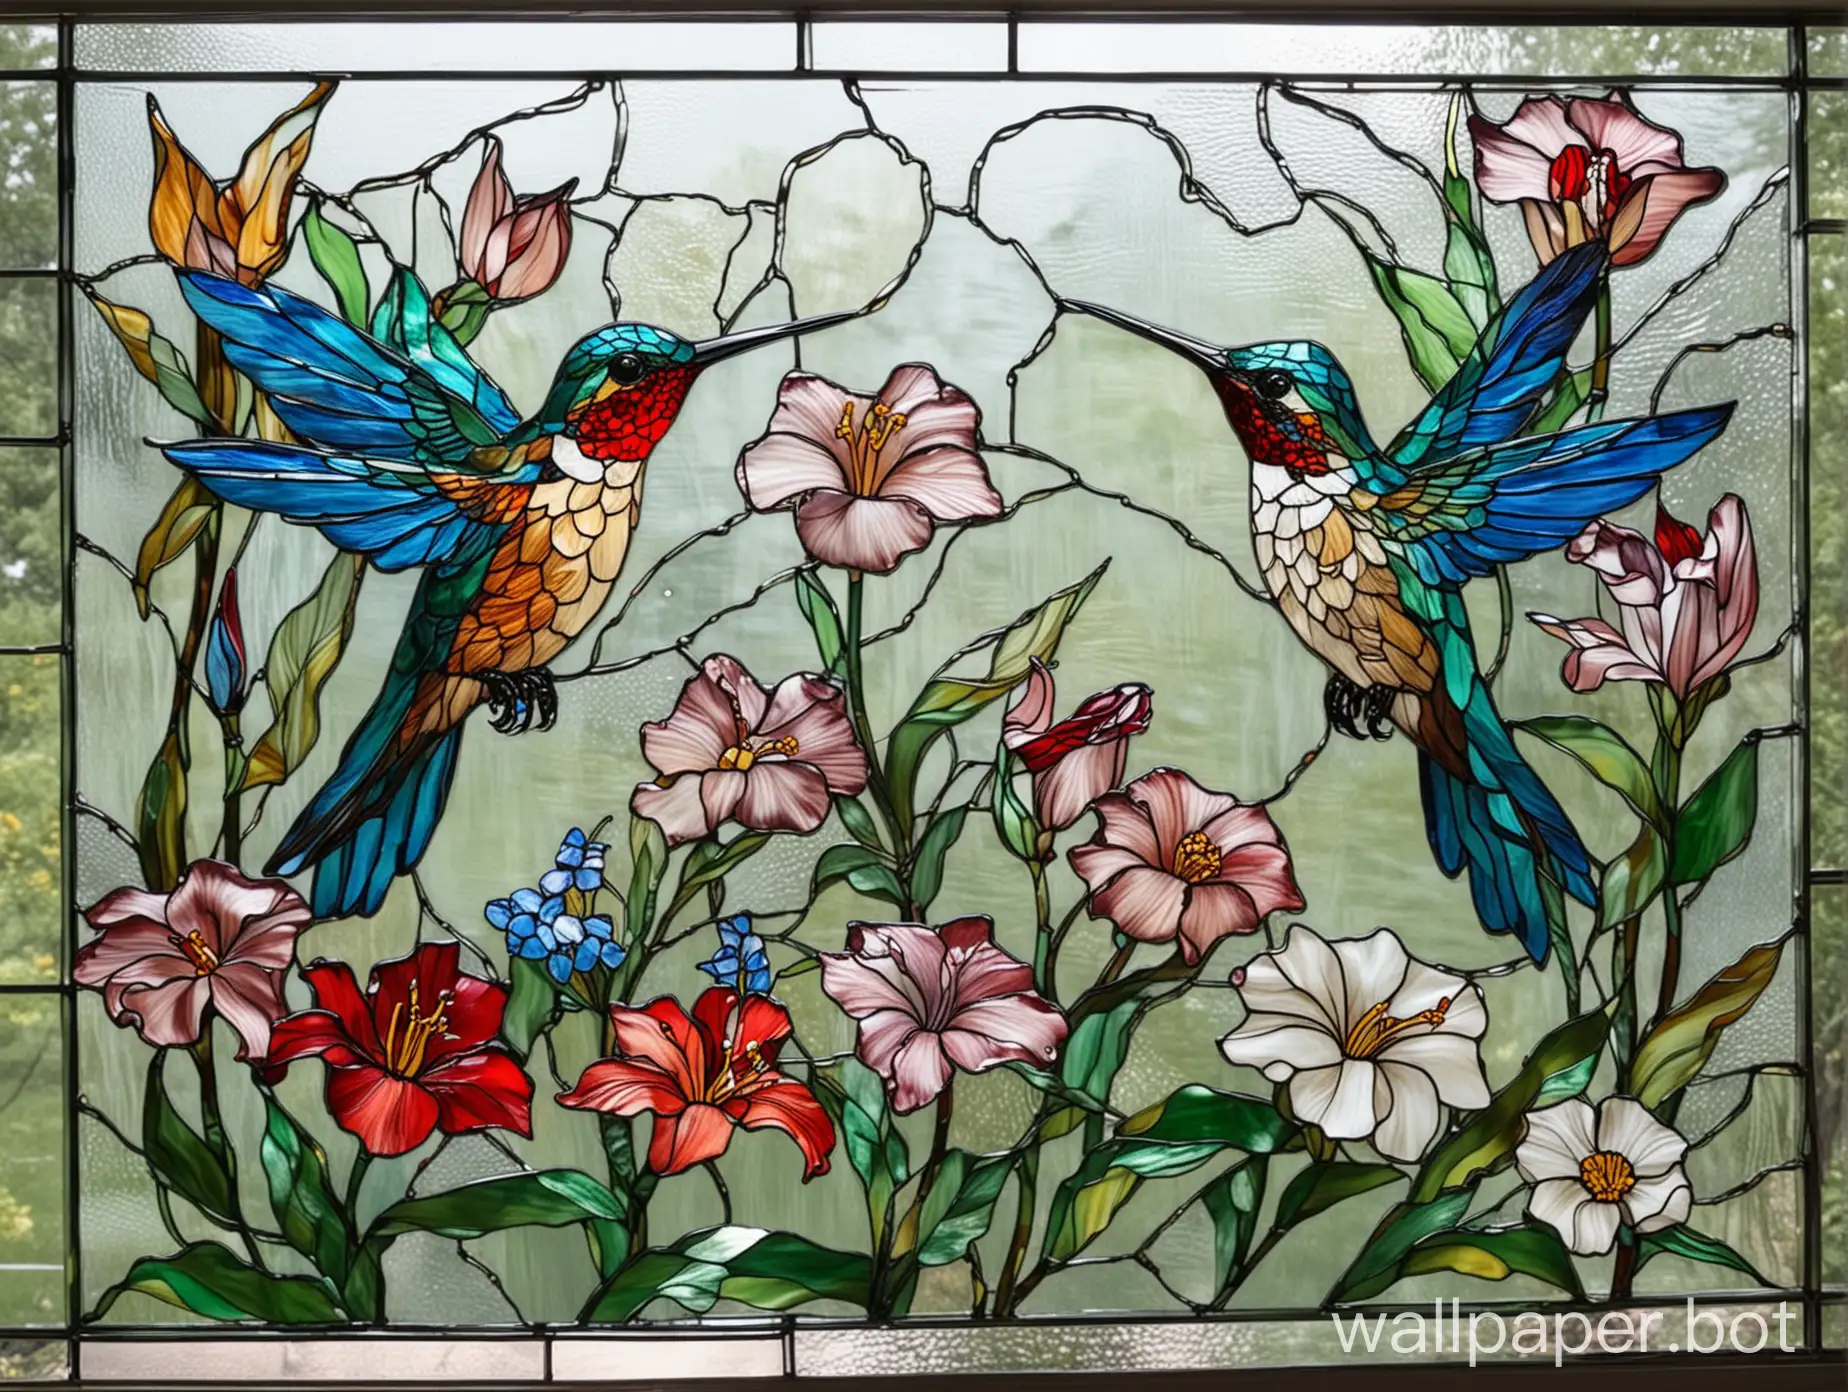 Stained glass without joints. Hummingbirds and flowers.